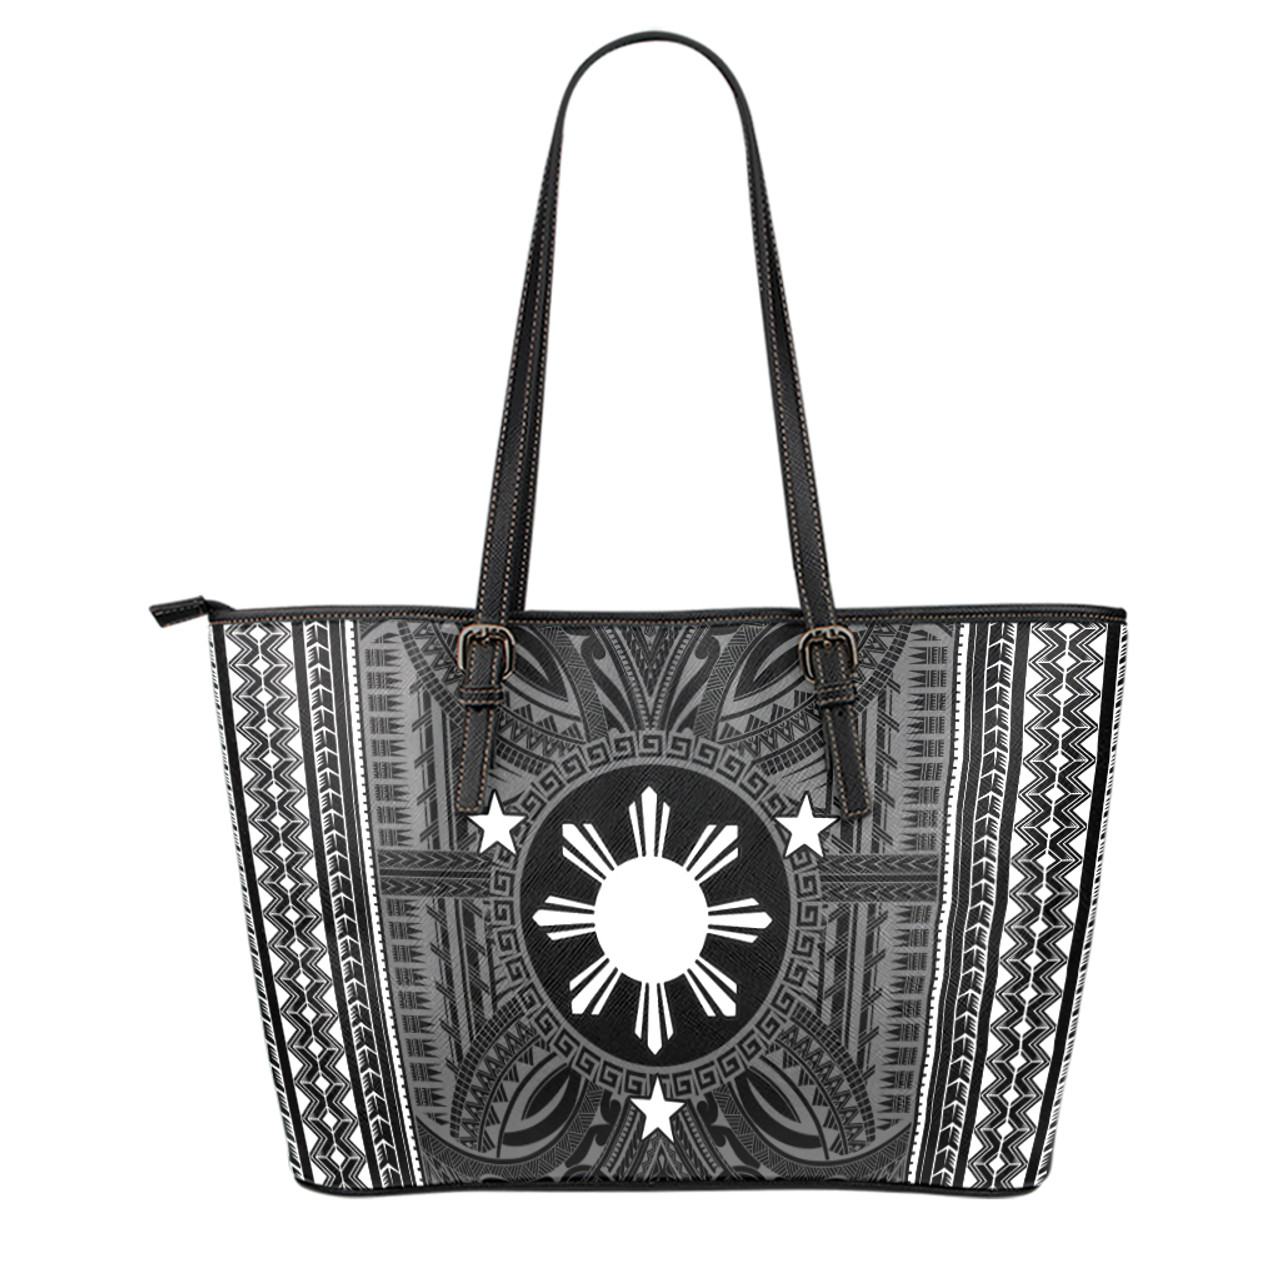 Philippines Filipino Sun Tribal Patterns Leather Totes